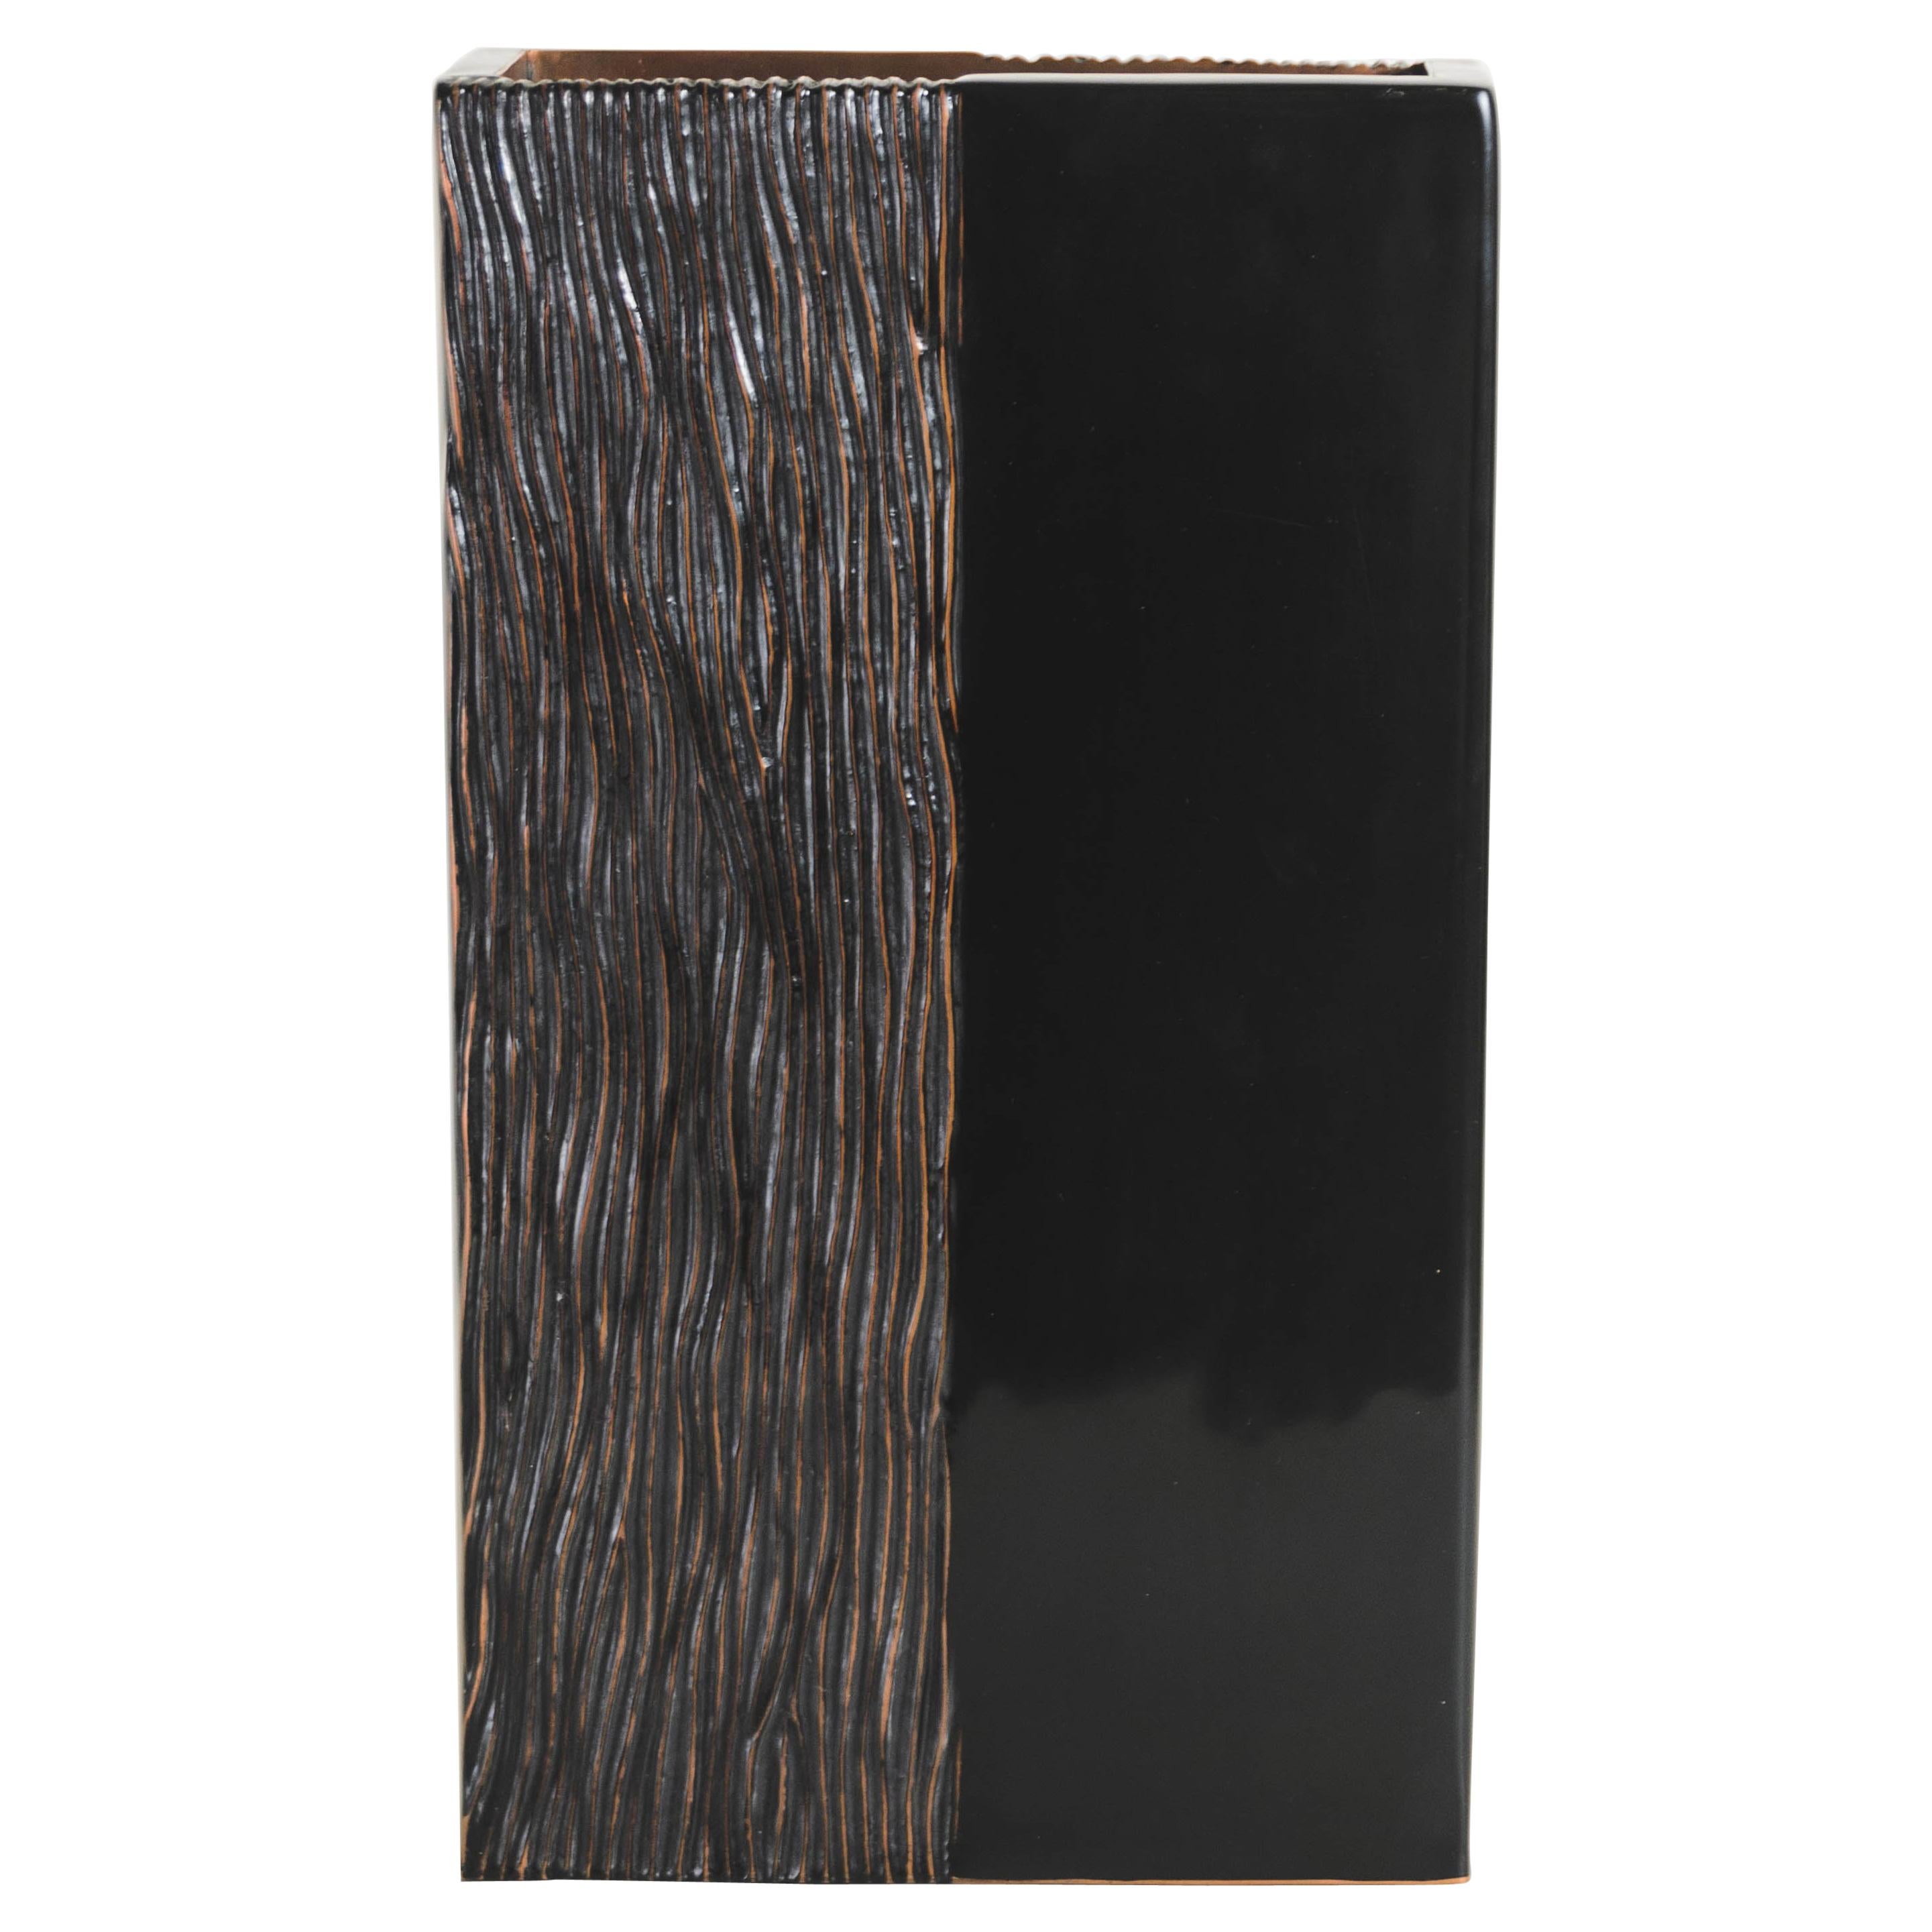 Contemporary Block Vase w/ Pleats Design in Black Lacquer by Robert Kuo